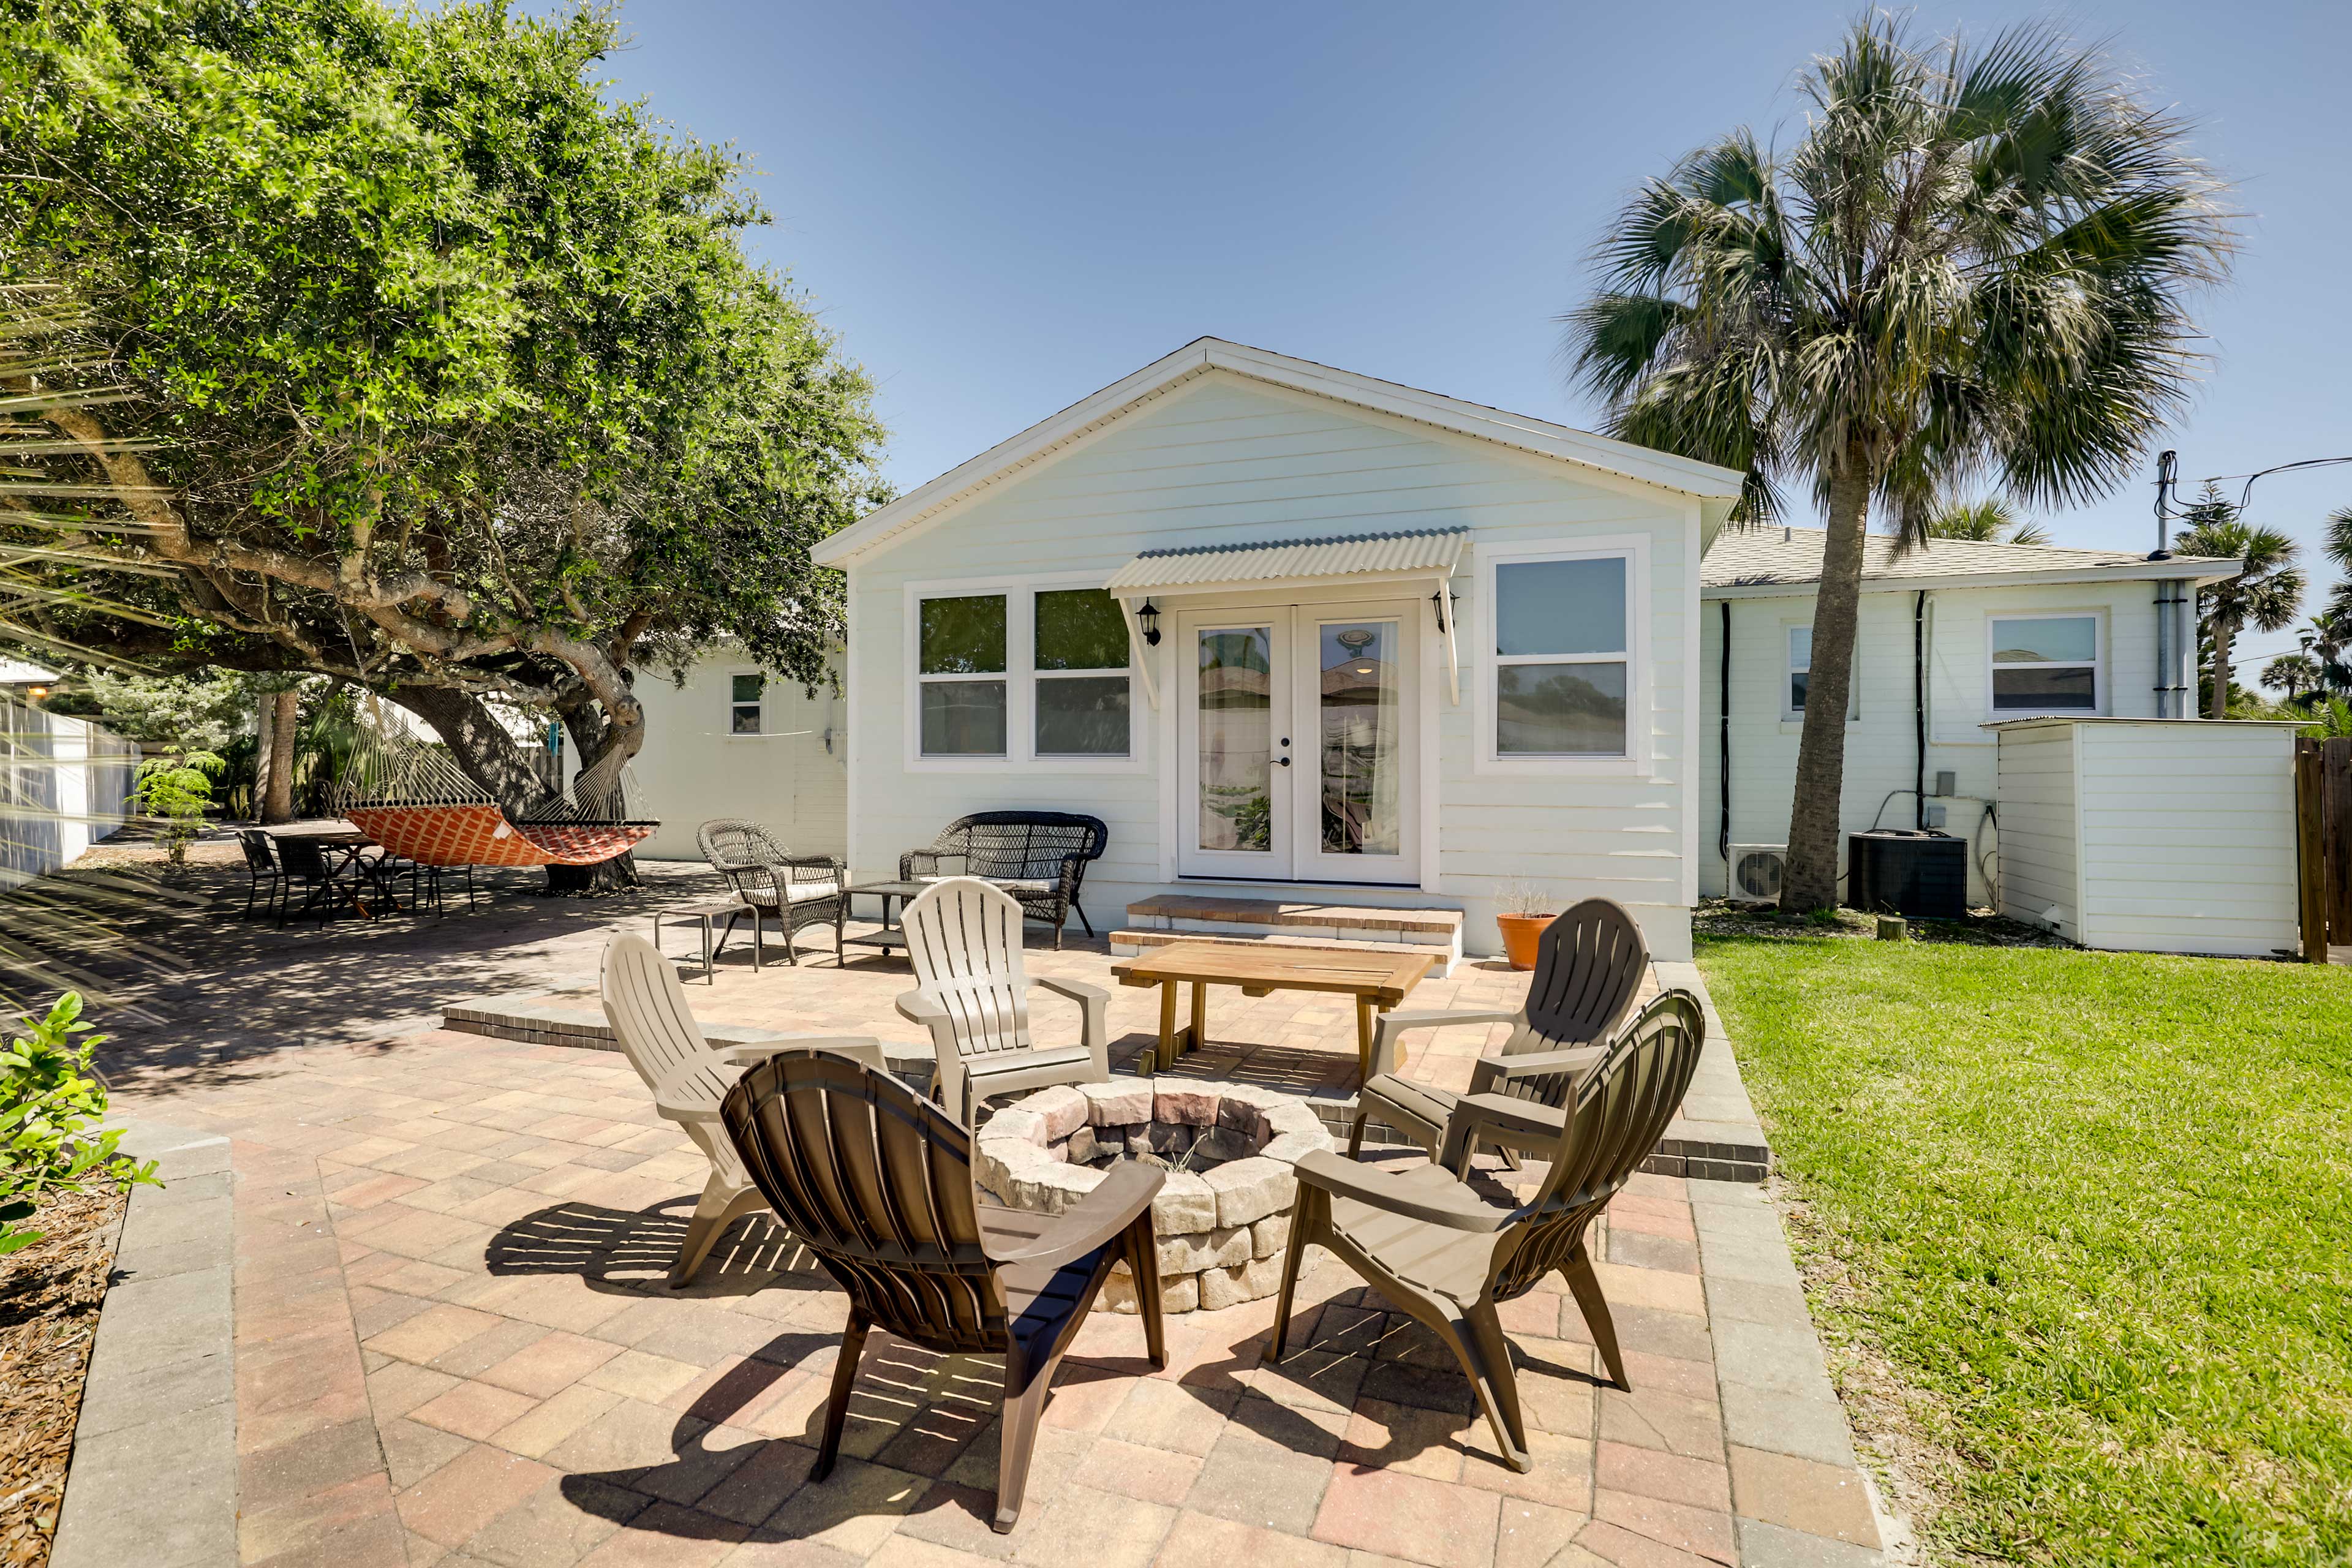 St. Augustine Beach Vacation Rental | 3BR | 2BA | 1,400 Sq Ft | Stairs to Enter